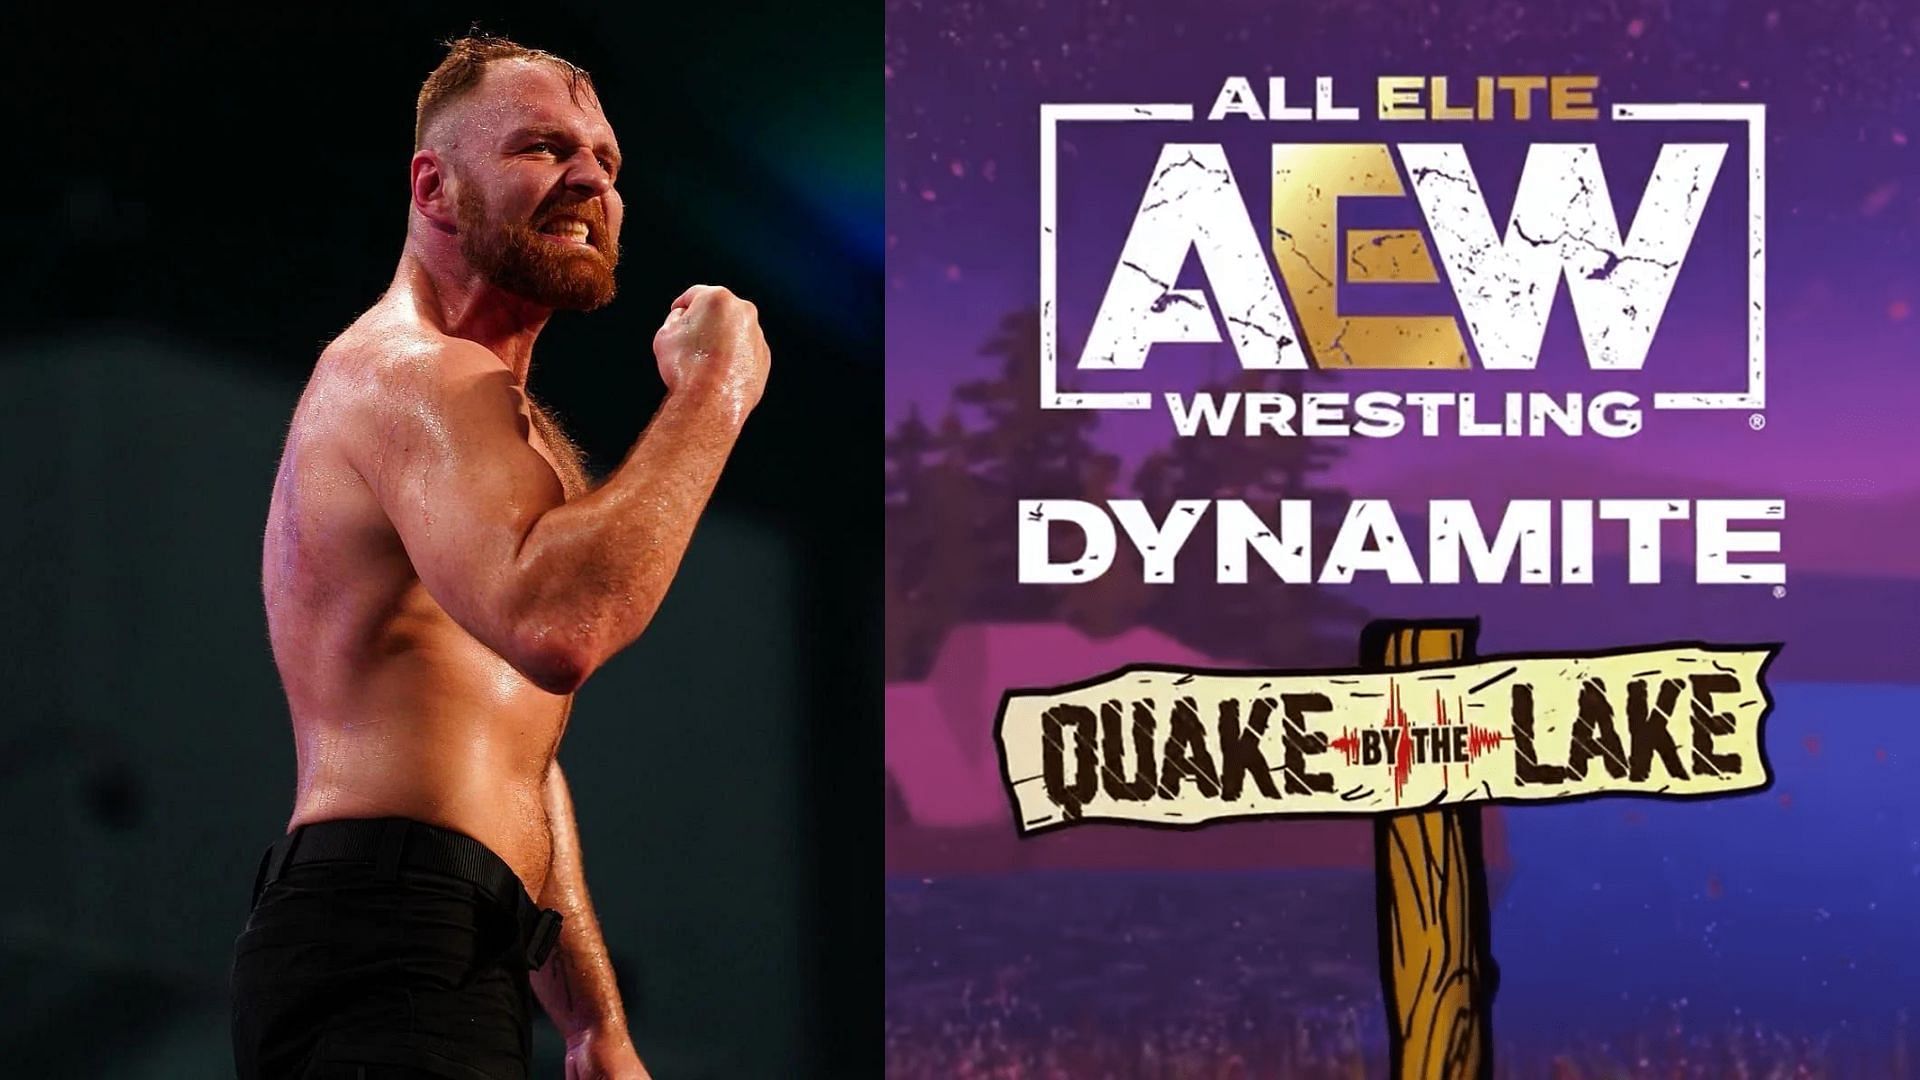 Jon Moxley (left); Quake By The Lake logo (right)